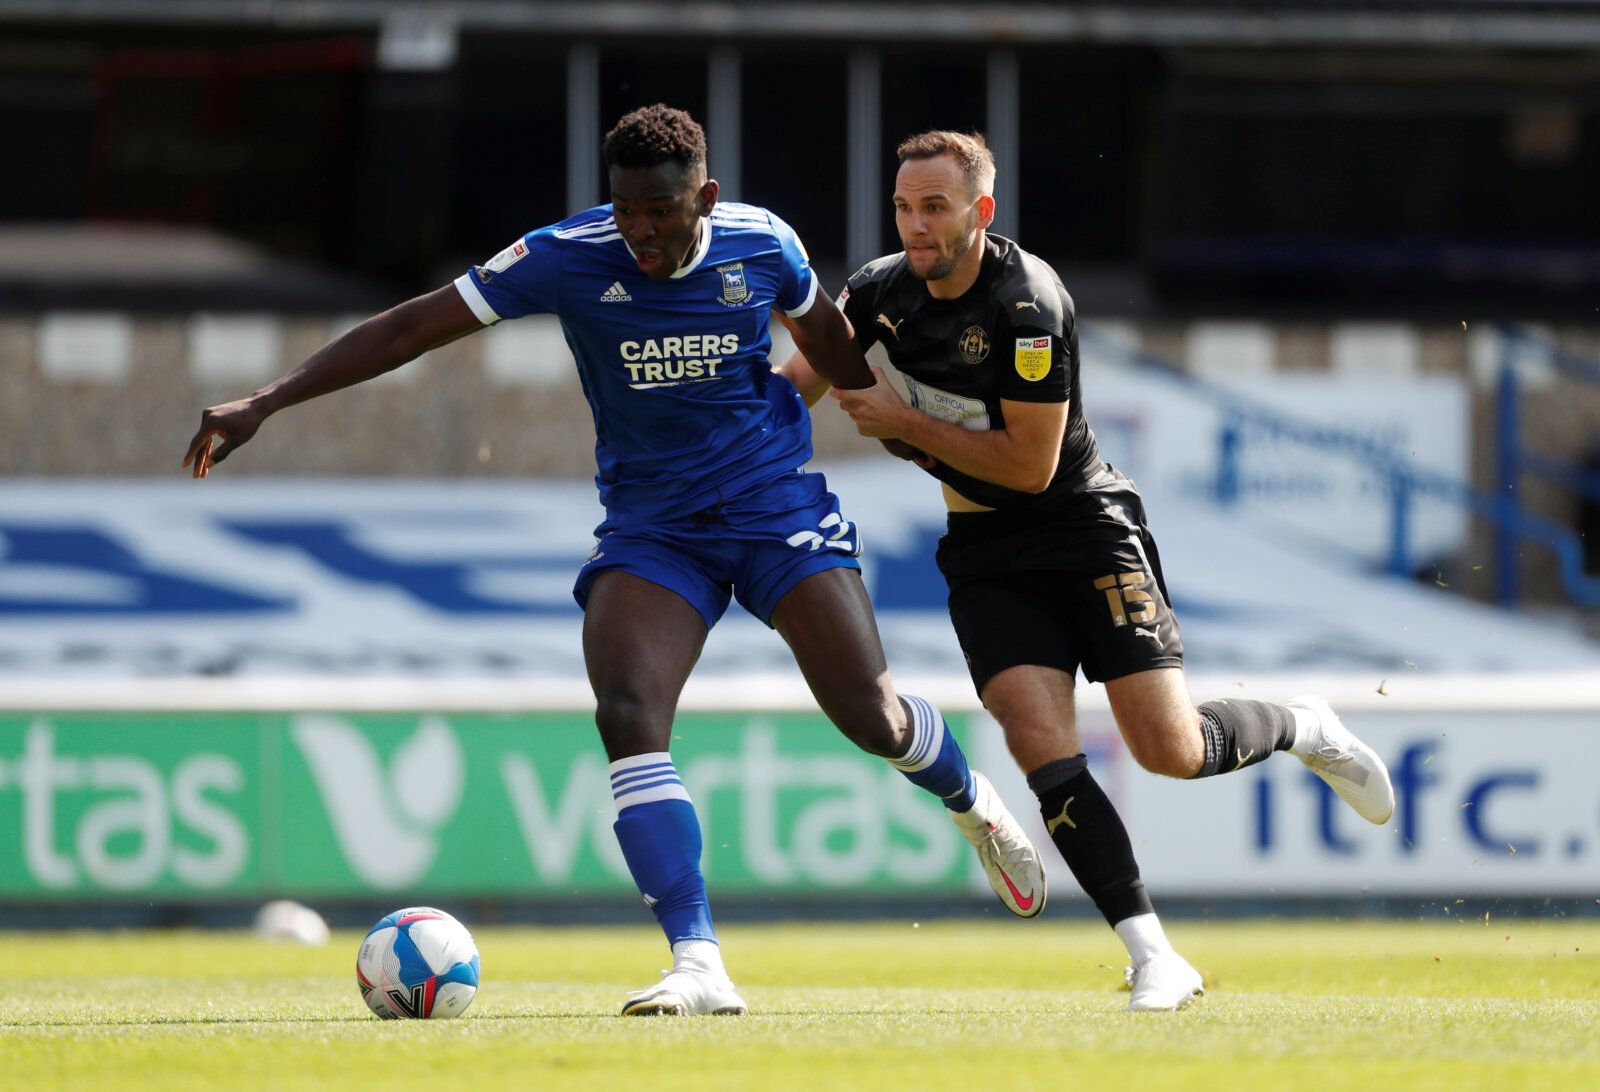 Soccer Football - League One - Ipswich Town v Wigan Athletic - Portman Road, Ipswich, Britain - September 13, 2020   Ipswich Town’s Aristote Nsiala in action with Wigan’s Dan Gardner   Action Images/Matthew Childs    EDITORIAL USE ONLY. No use with unauthorized audio, video, data, fixture lists, club/league logos or 